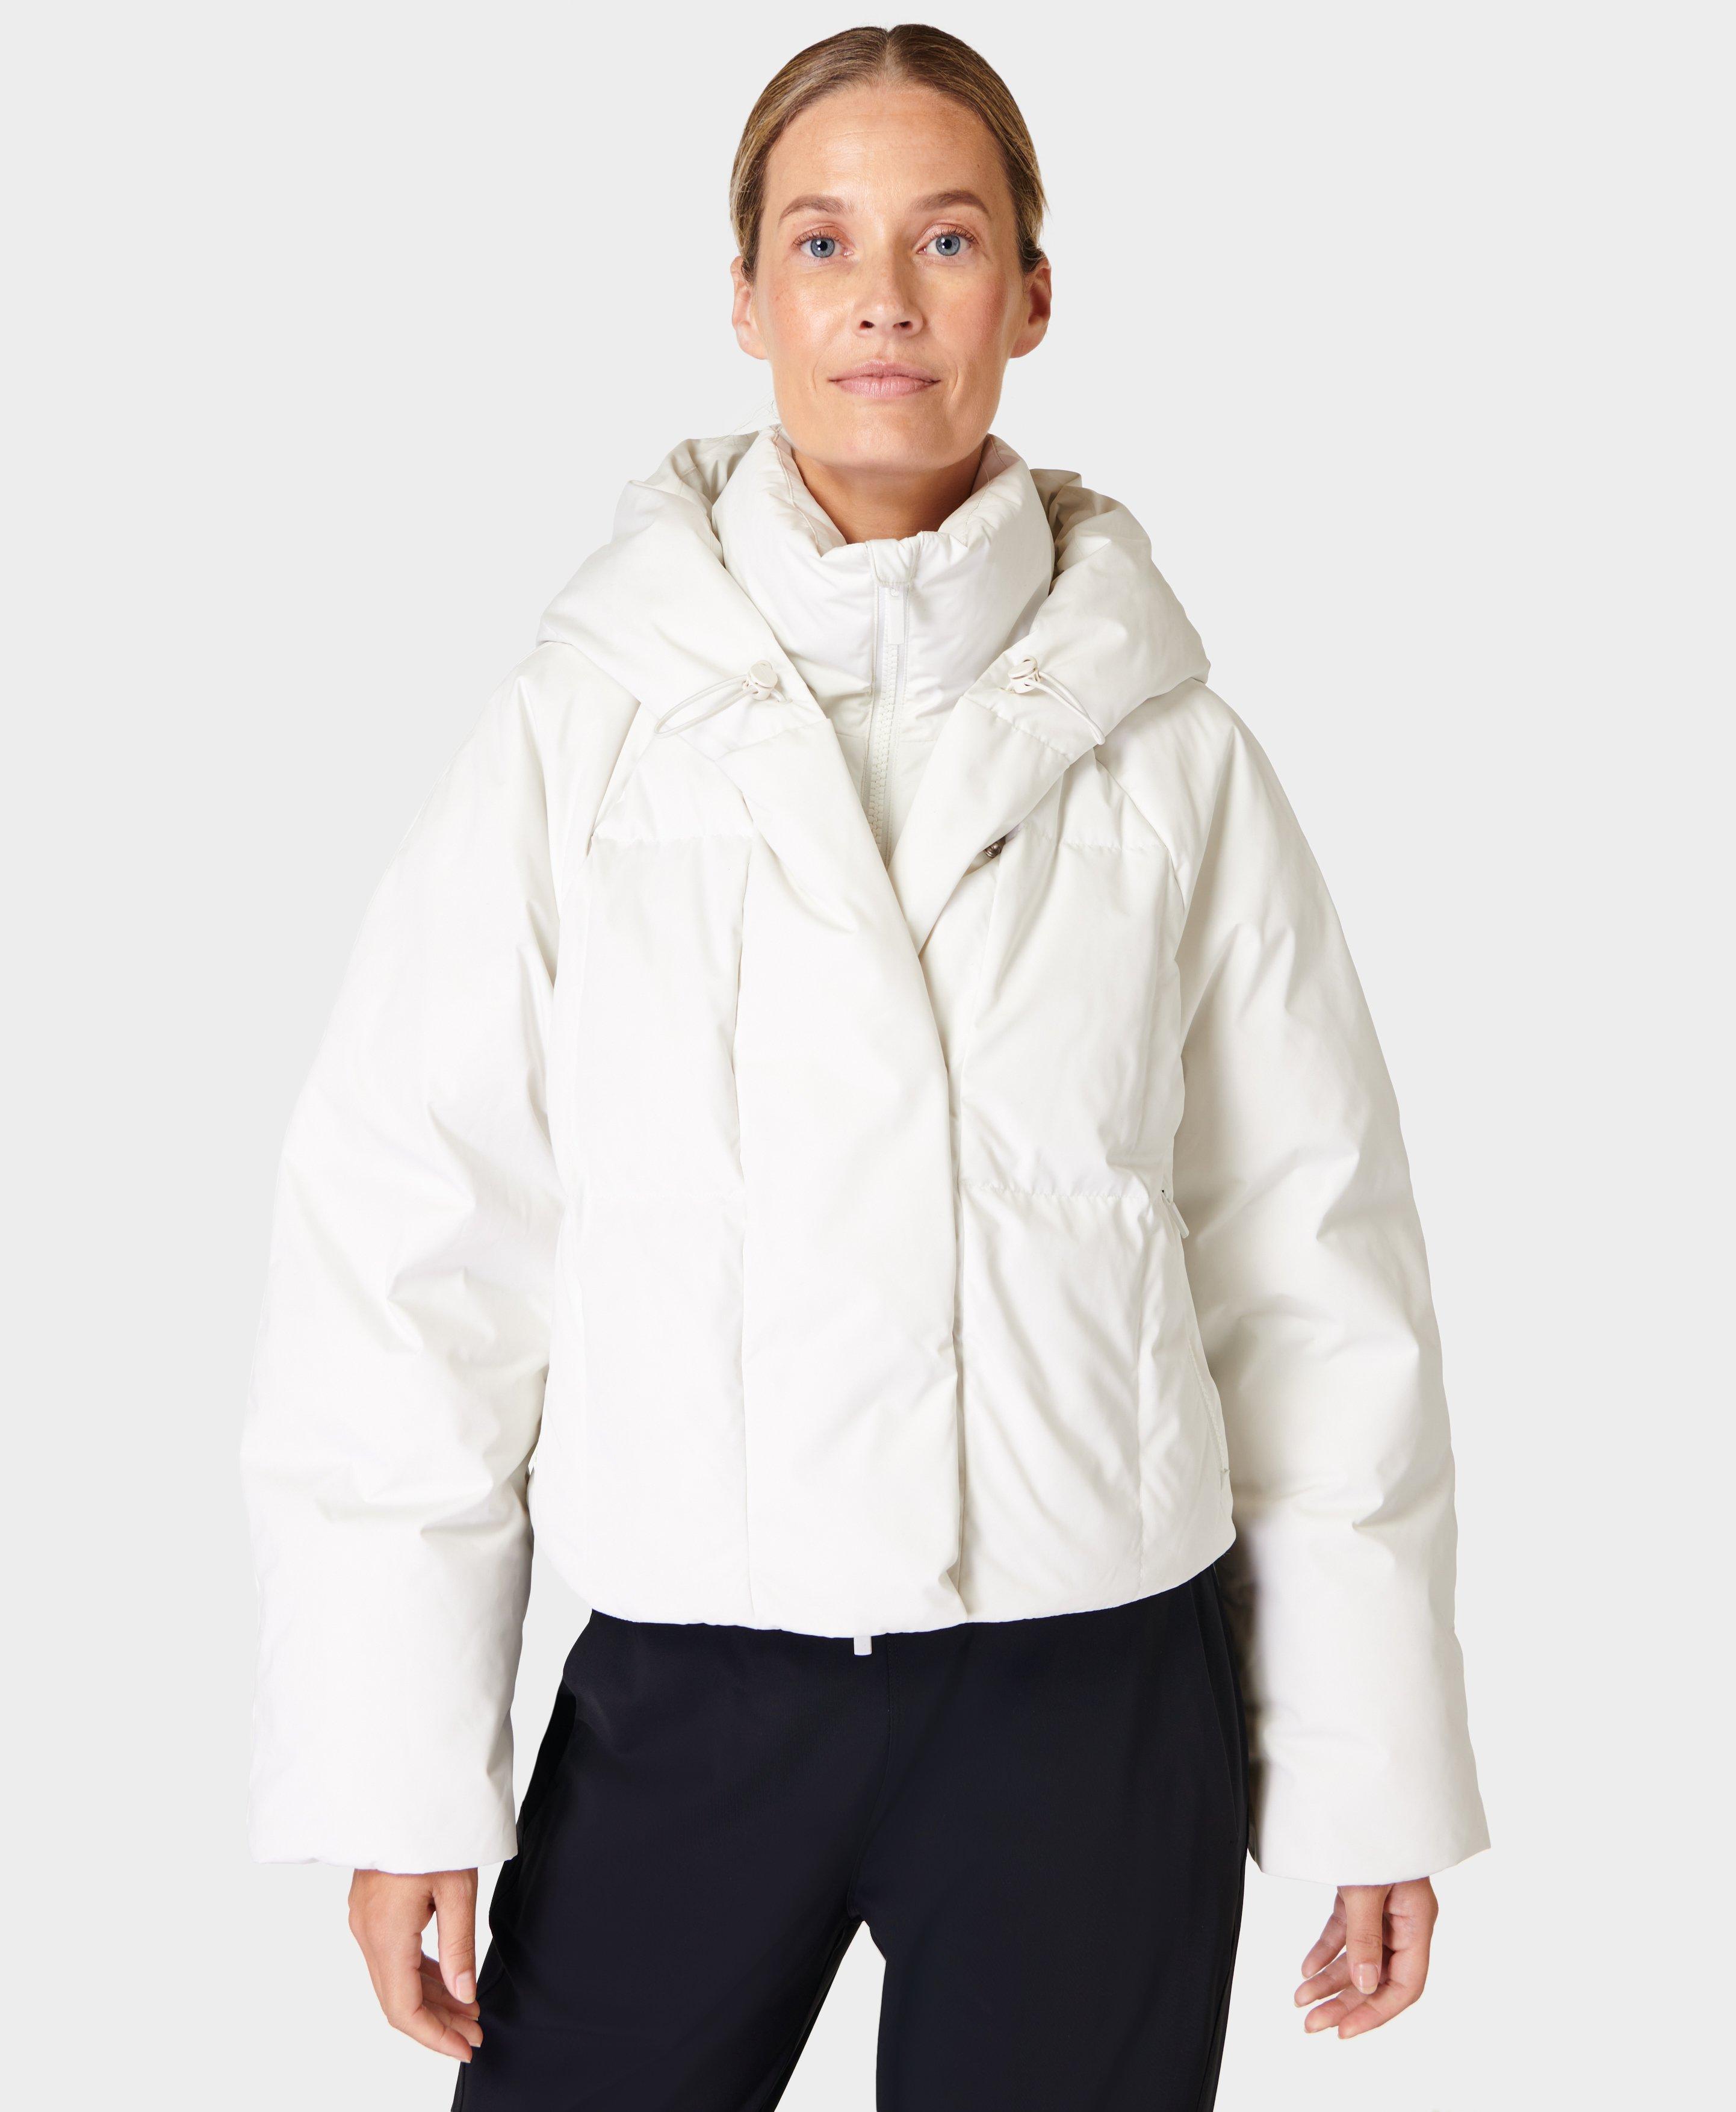 Sweaty Betty Eco Therma Workout/Running Jacket - S - RRP £110